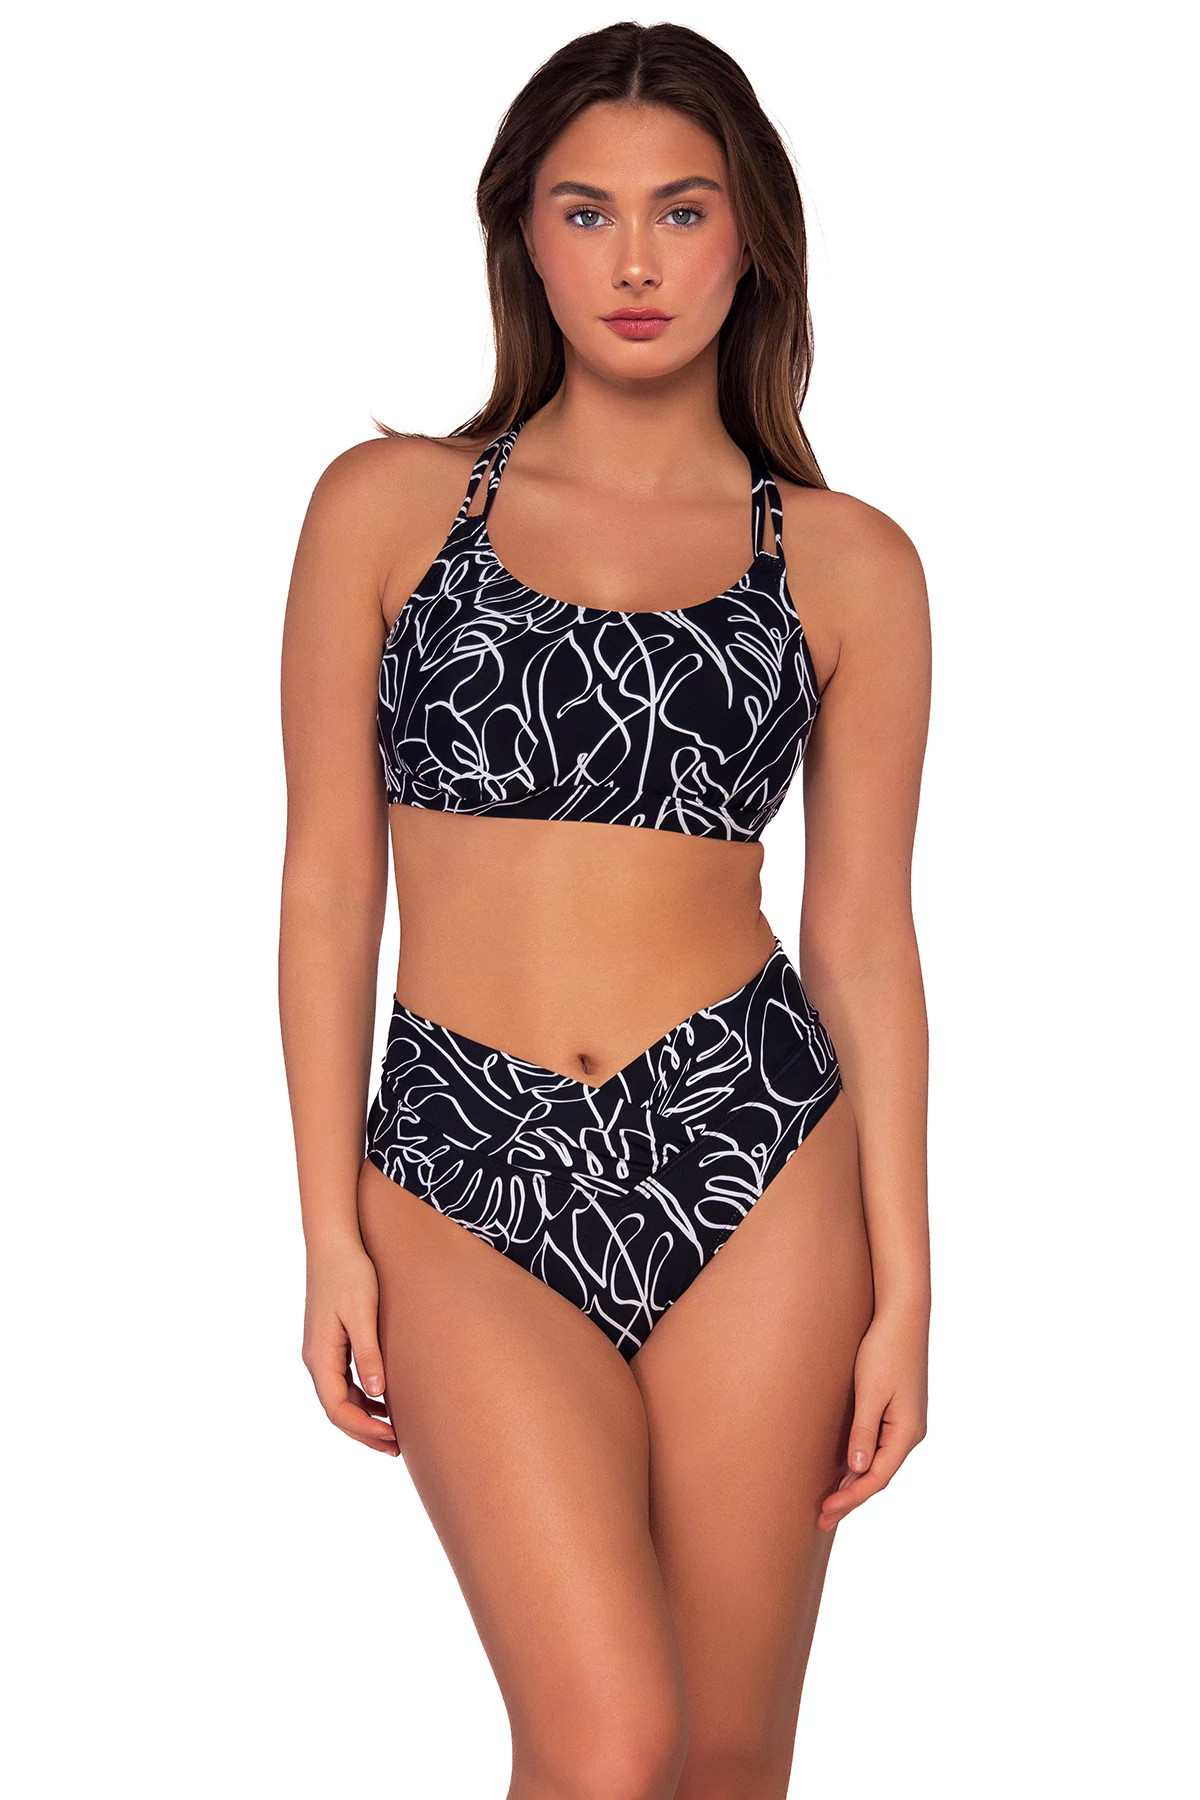 LOST PALMS Taylor Bralette Bikini Top (D+ Cup) image number 1